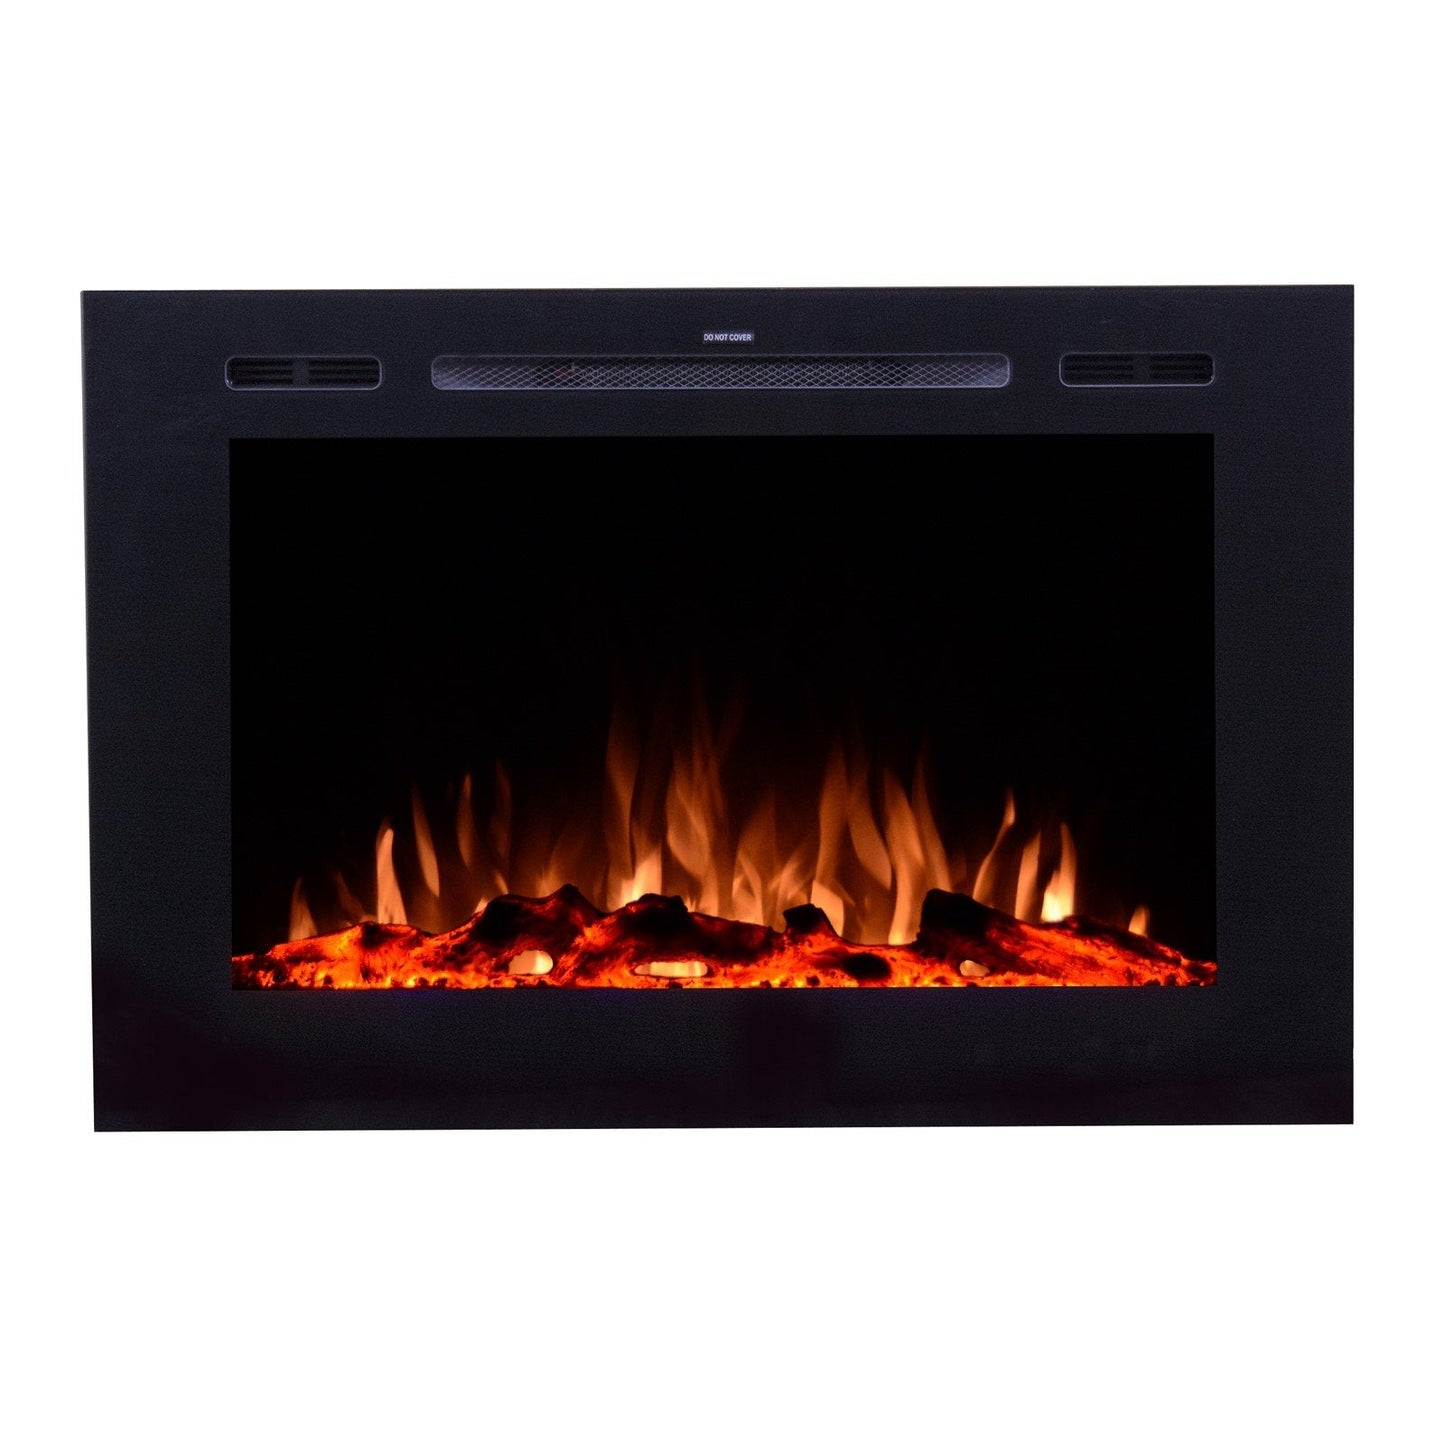 Touchstone Forte 80006 40" Recessed Electric Fireplace